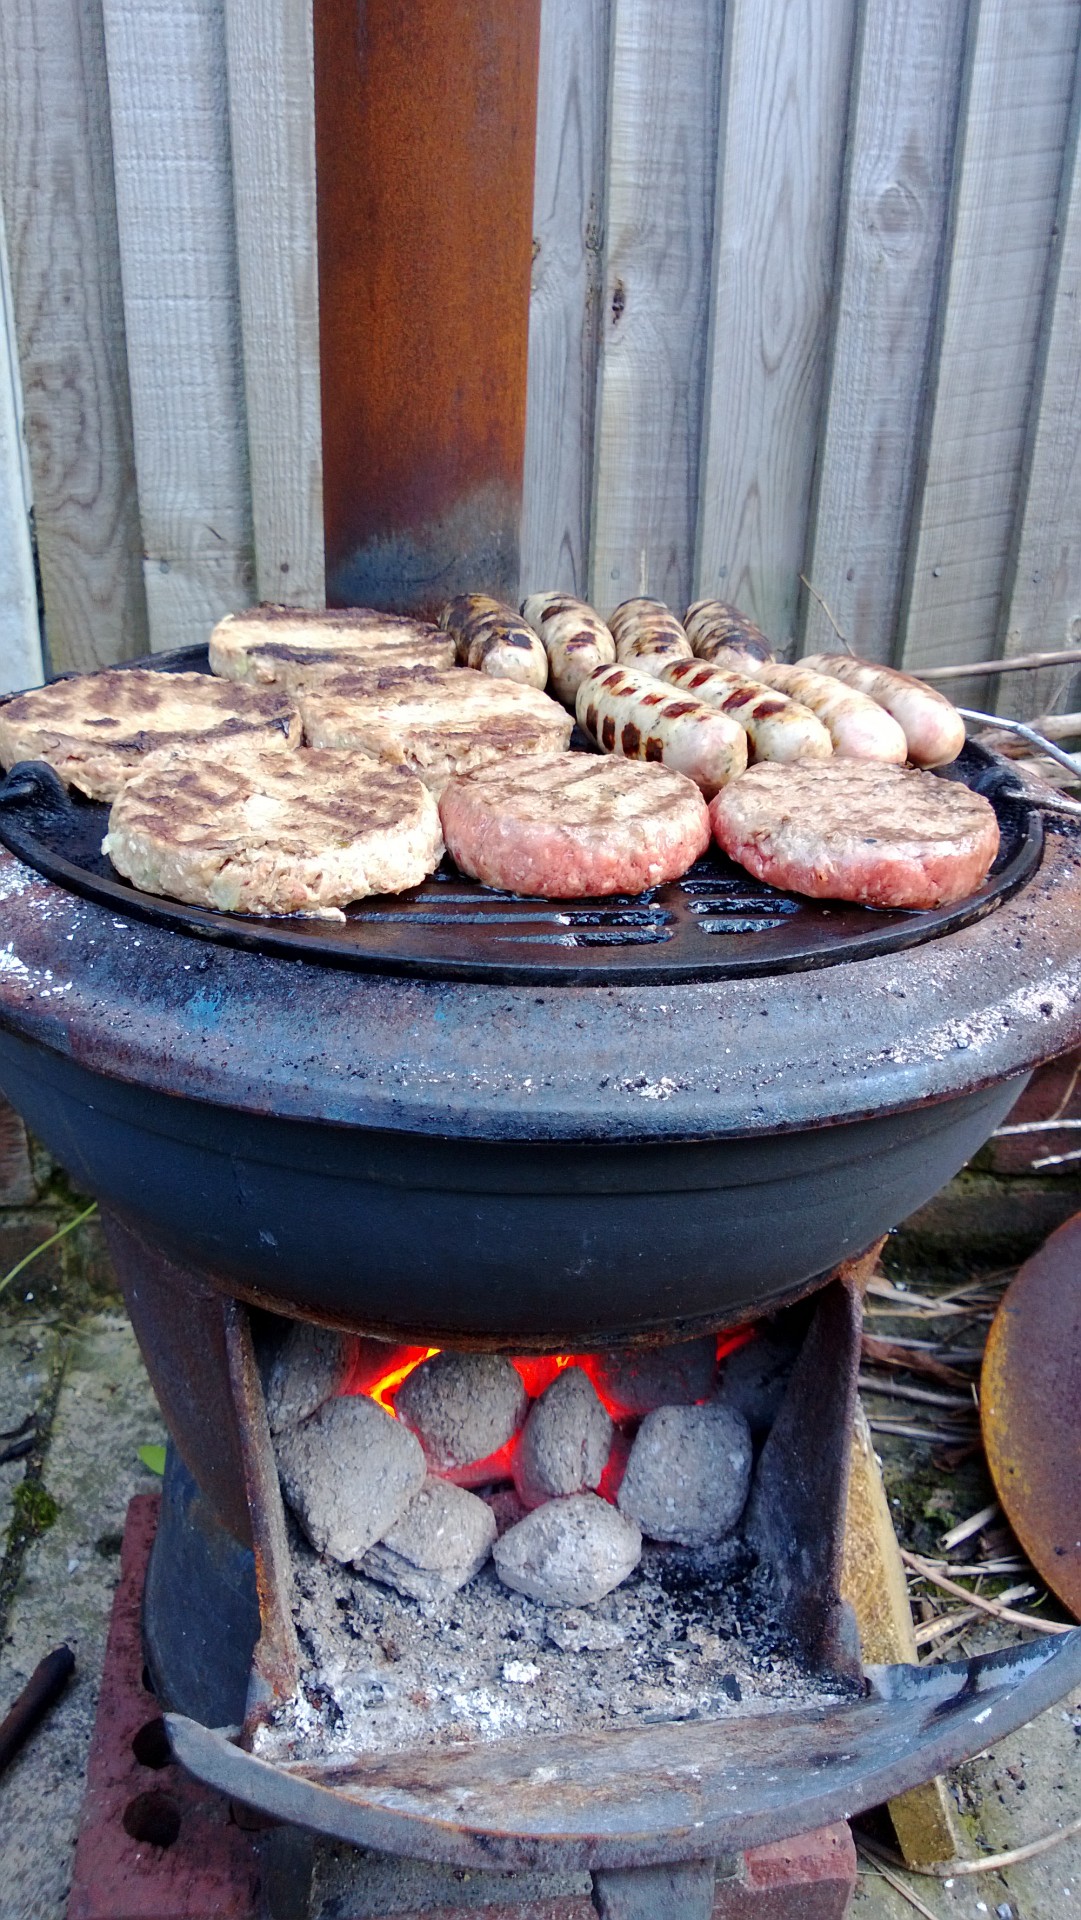 Cooking BBQ'd meat on an outdoor stove on charcoal